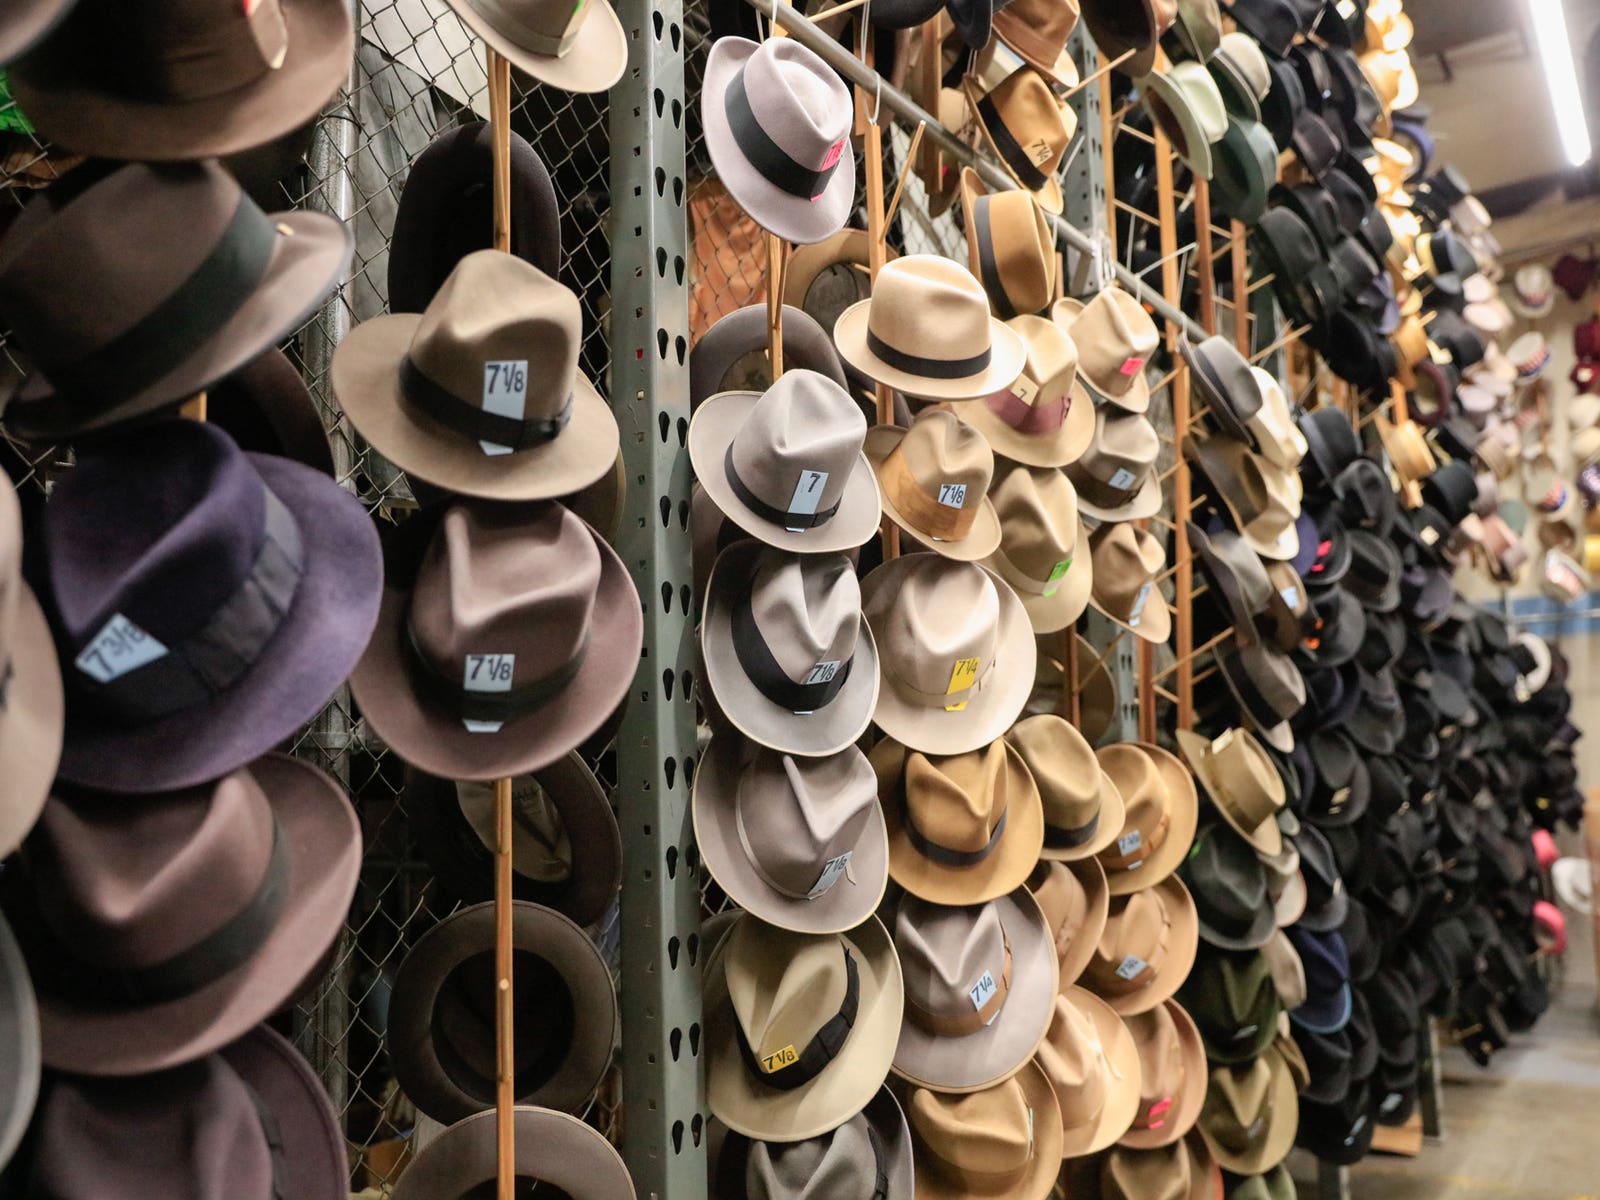 The Top 10 Costume Shops in Los Angeles | Discover Los Angeles